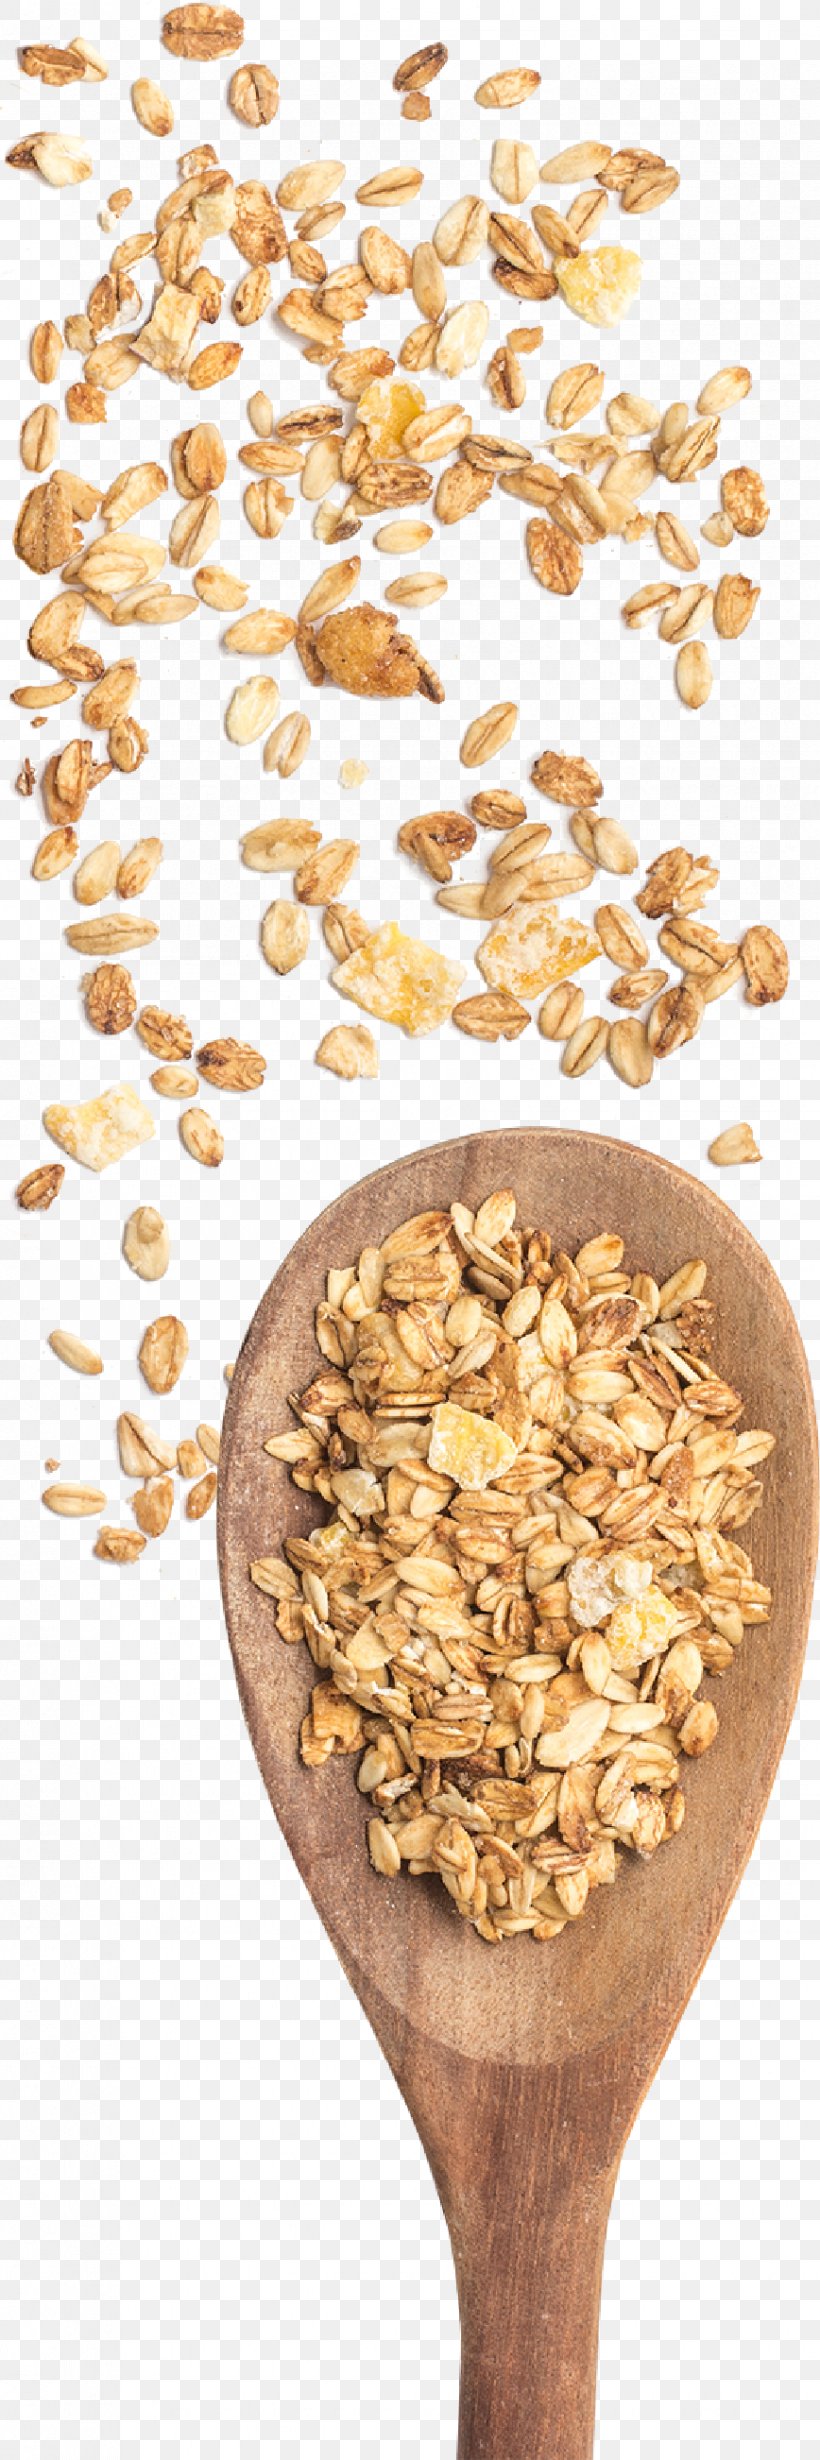 Breakfast Cereal Cereal Germ Whole Grain Oat, PNG, 868x2604px, Breakfast Cereal, Breakfast, Cereal, Cereal Germ, Commodity Download Free